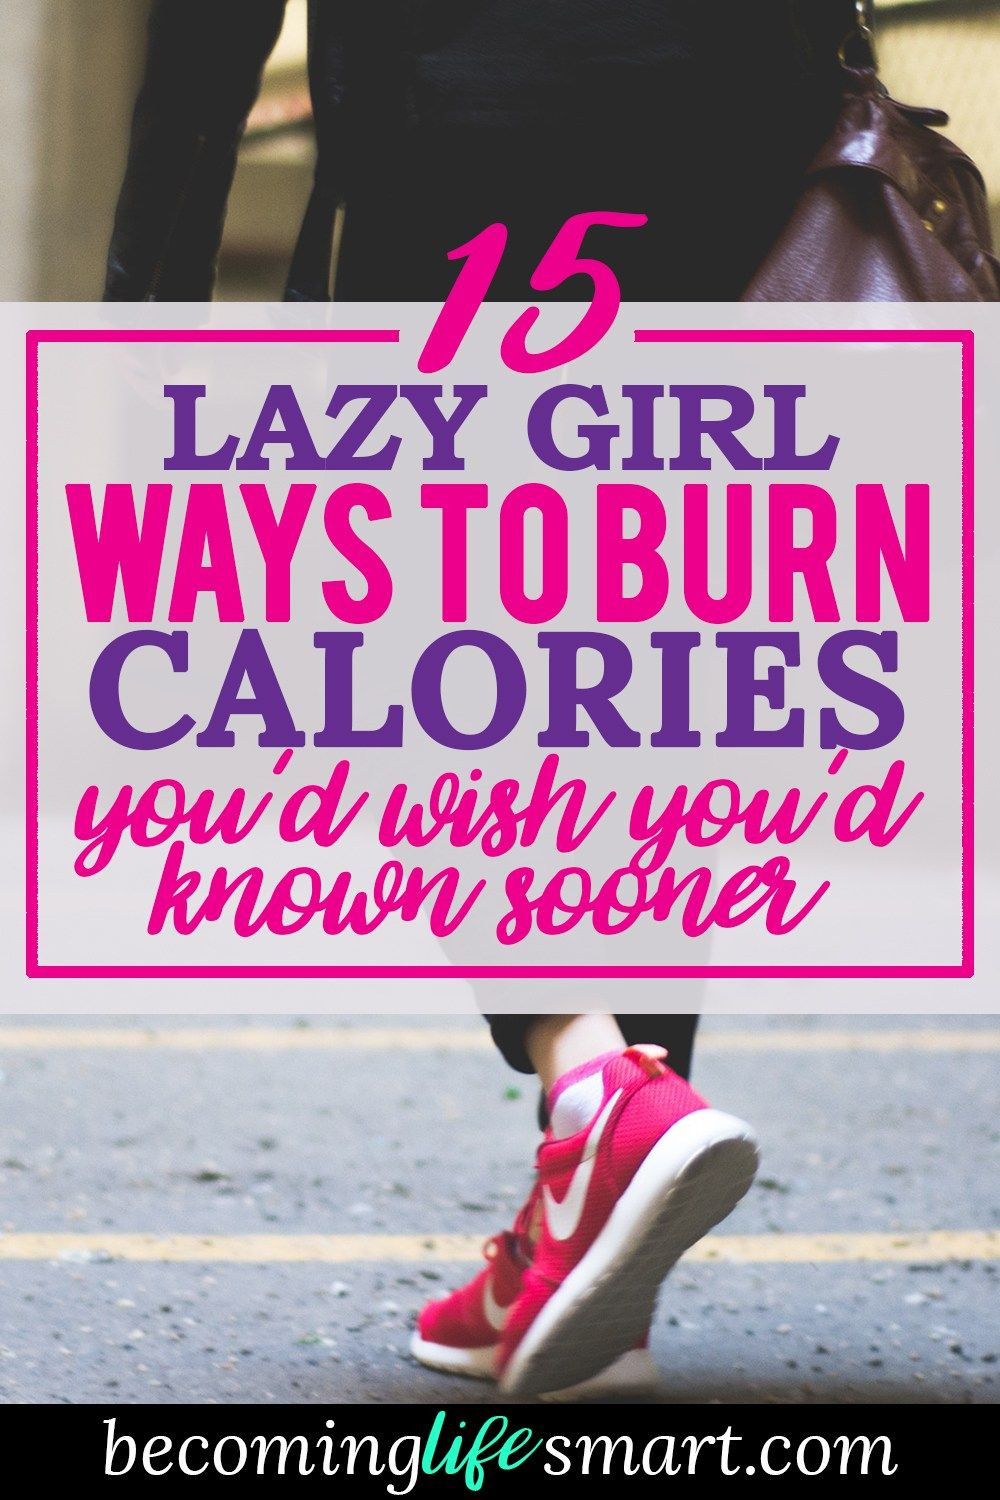 How To Lose Weight Without Exercise Lazy Girl
 15 Lazy Girl Ways to Get More Exercise and Burn Calories